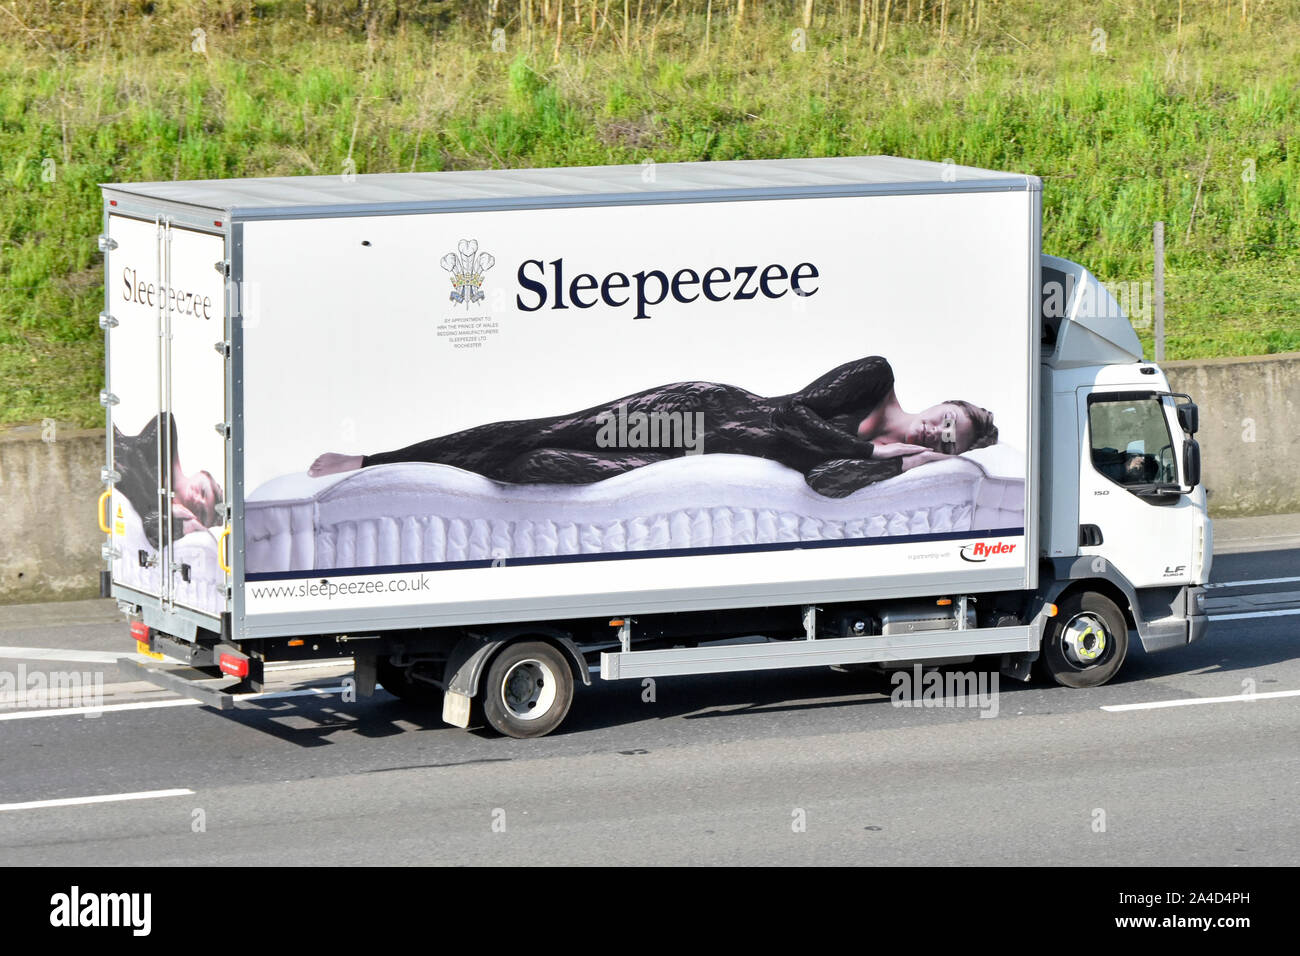 Sleepeezee business & manufacturer of mattresses using side of supply chain delivery lorry truck to advertise a fashion model posing on a mattress uk Stock Photo